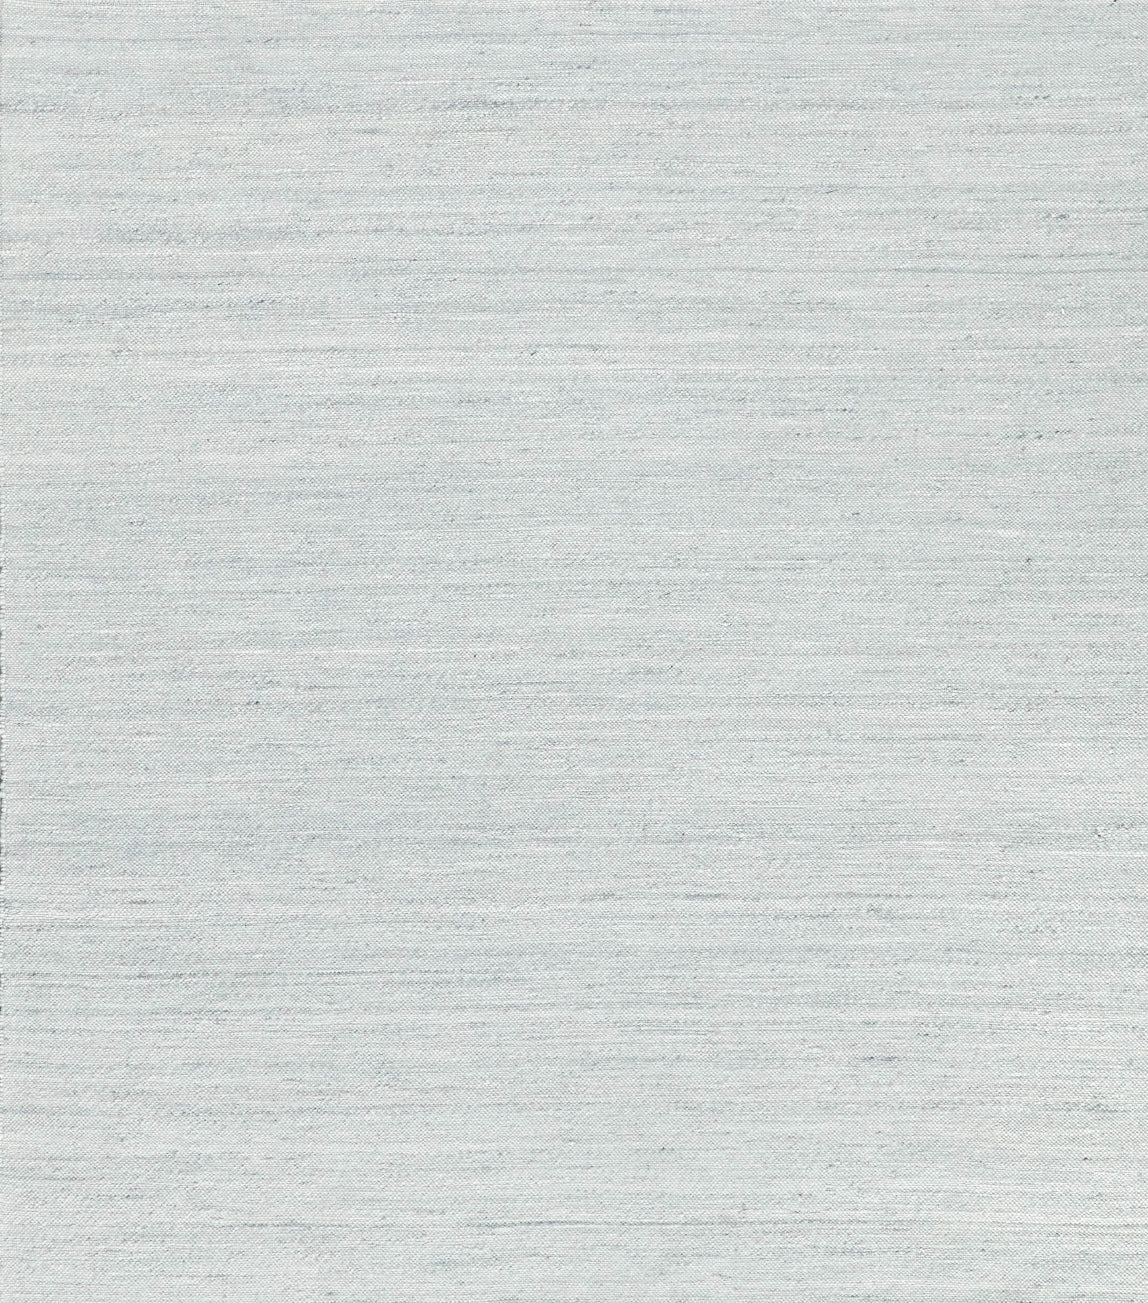 Exquisite Rugs Tocayo 4596 Ivory/Light Blue Area Rug